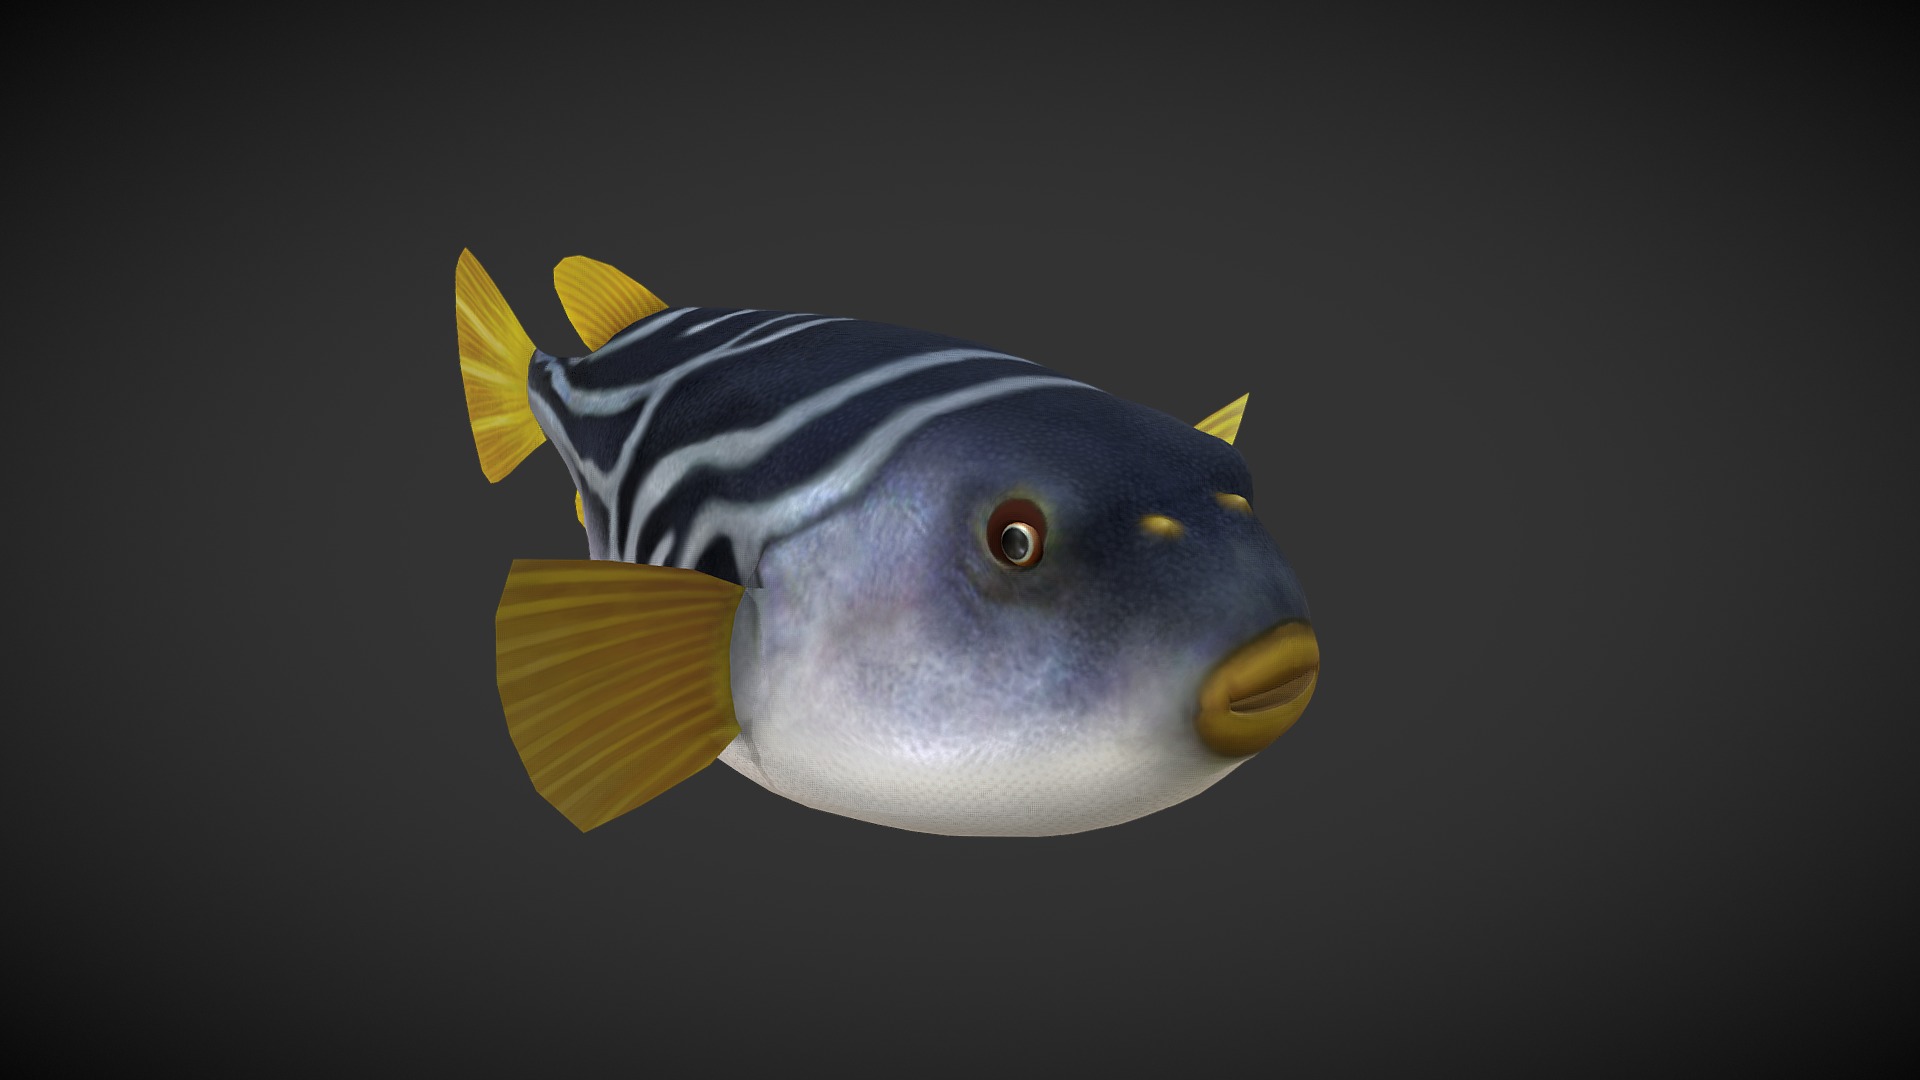 3D model Puffer Fish - This is a 3D model of the Puffer Fish. The 3D model is about a blue and yellow fish.